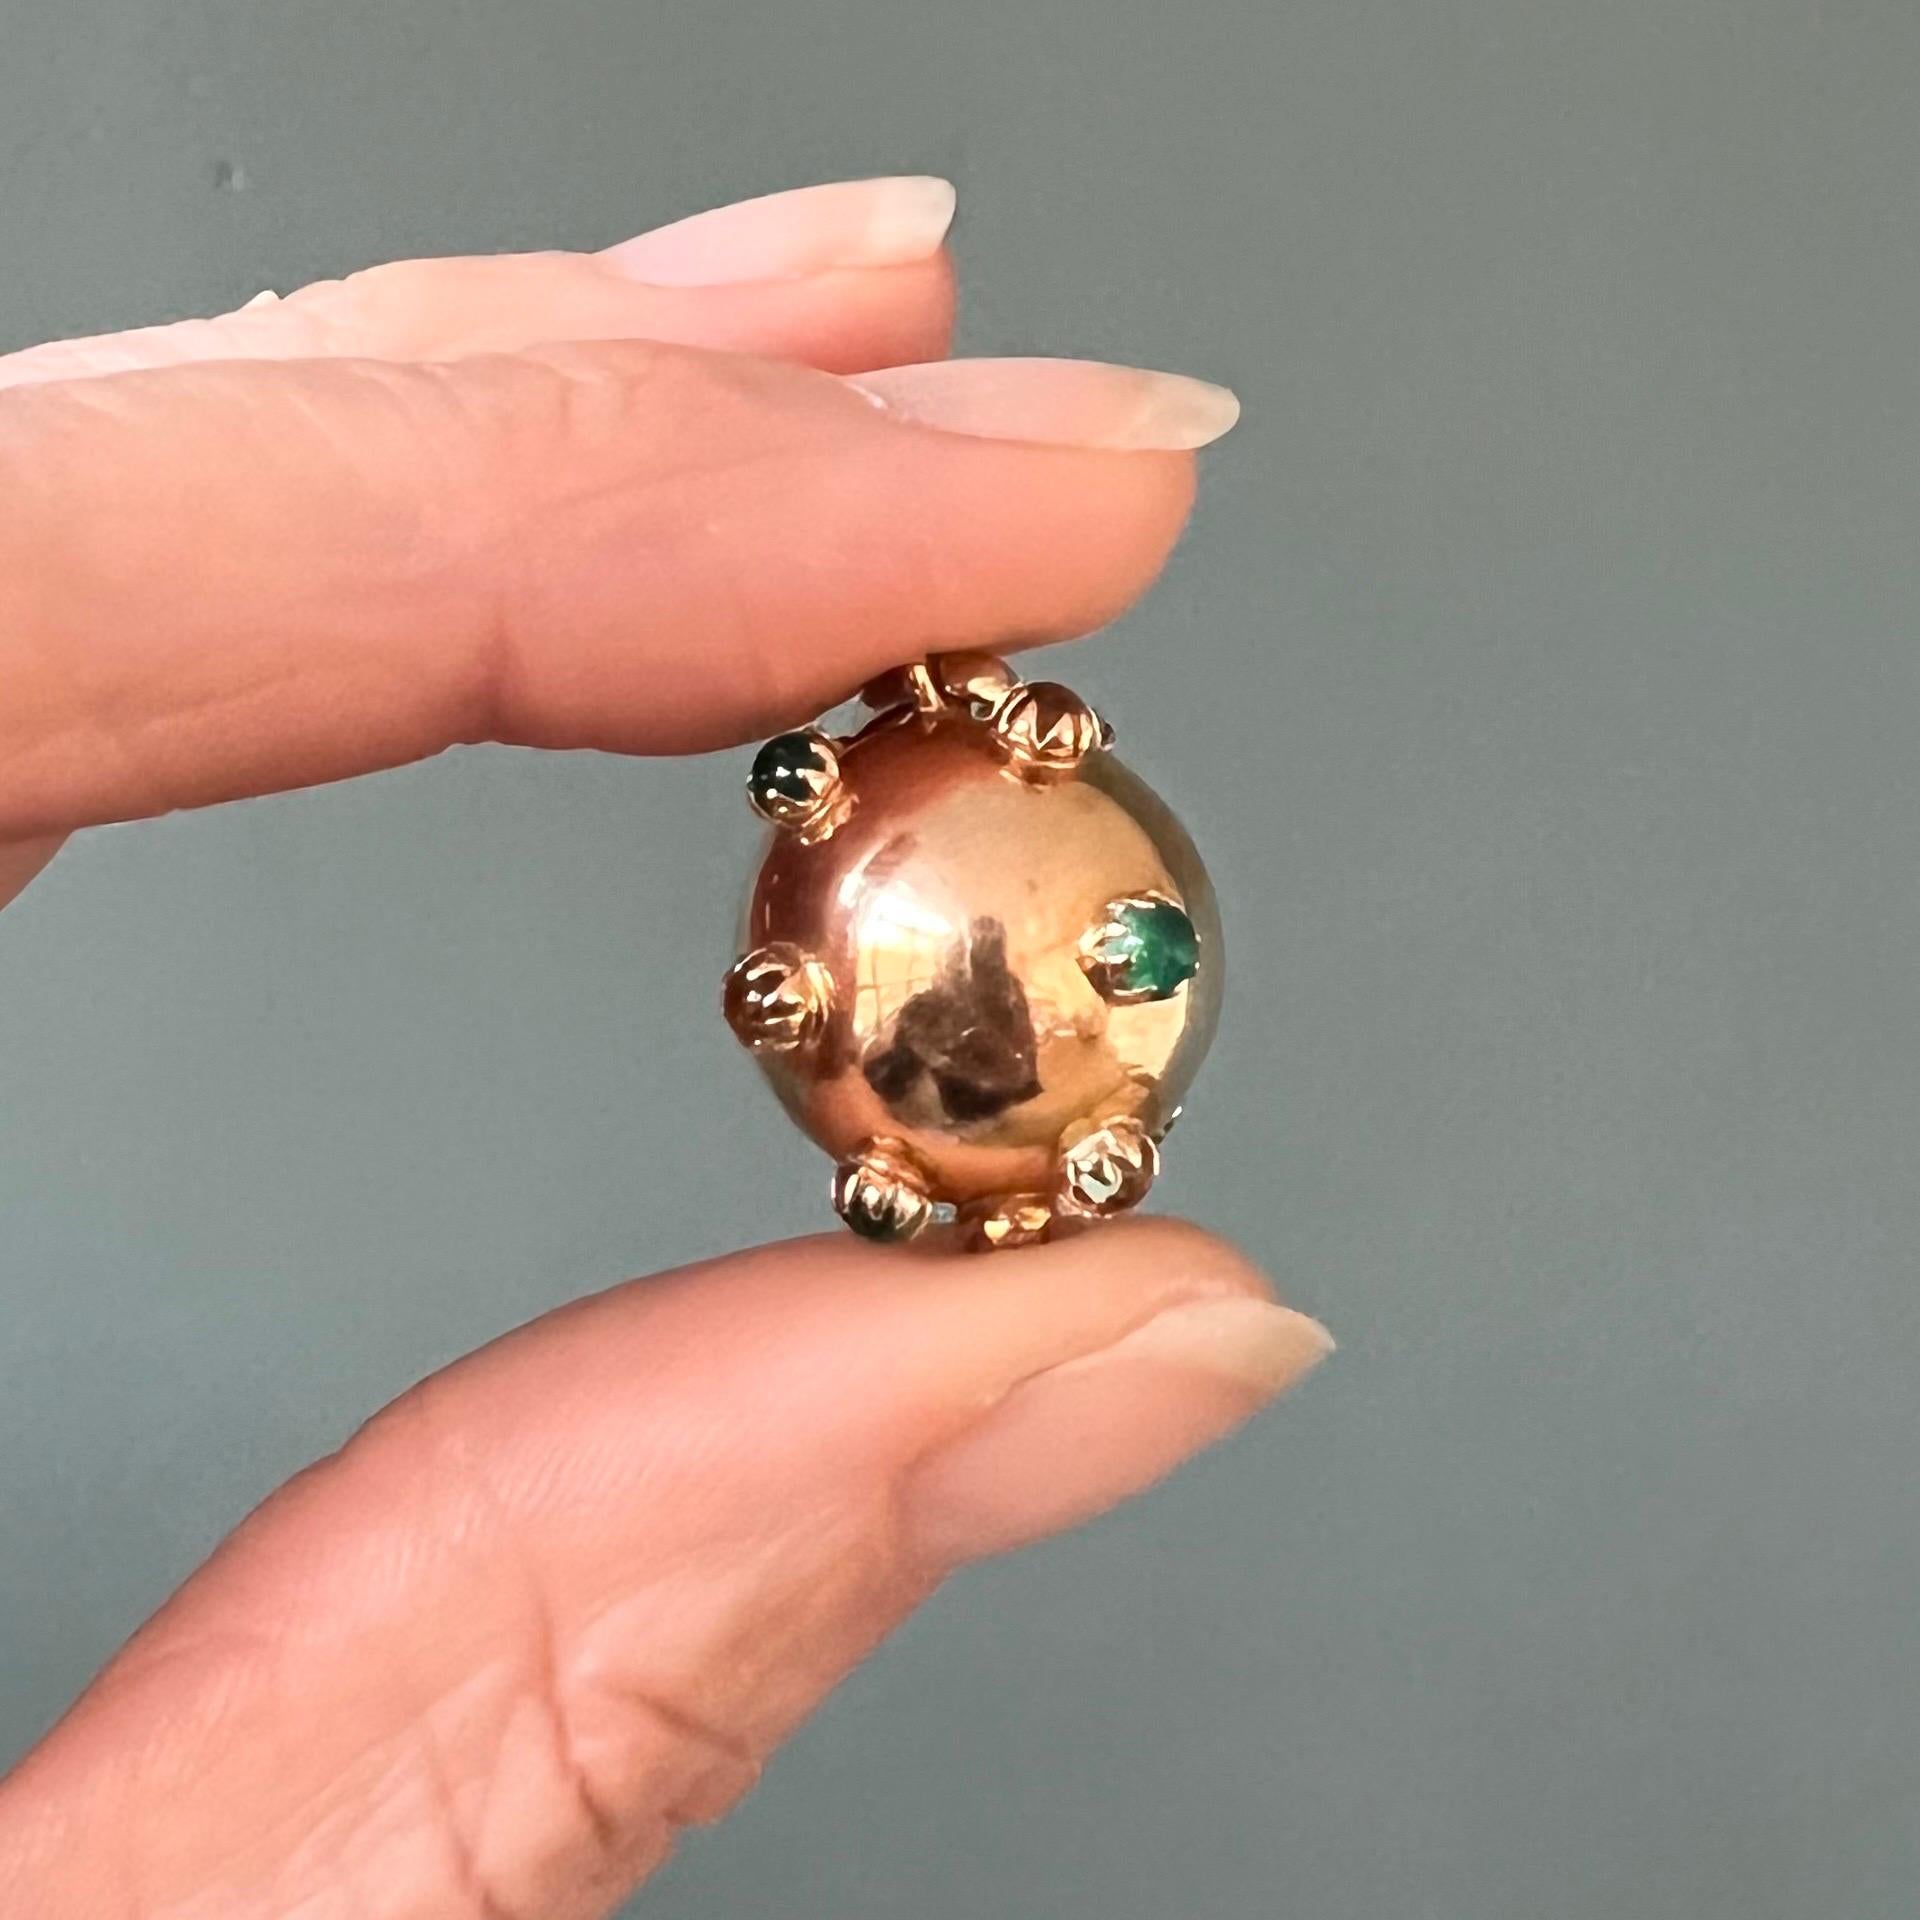 A large yellow gold vintage sputnik charm pendant. This beautiful gold ball pendant is crafted in 18 karat yellow gold and set with multiple studded colored stones.

Charms are wearable memories, it has a symbolic and often a sentimental value. This